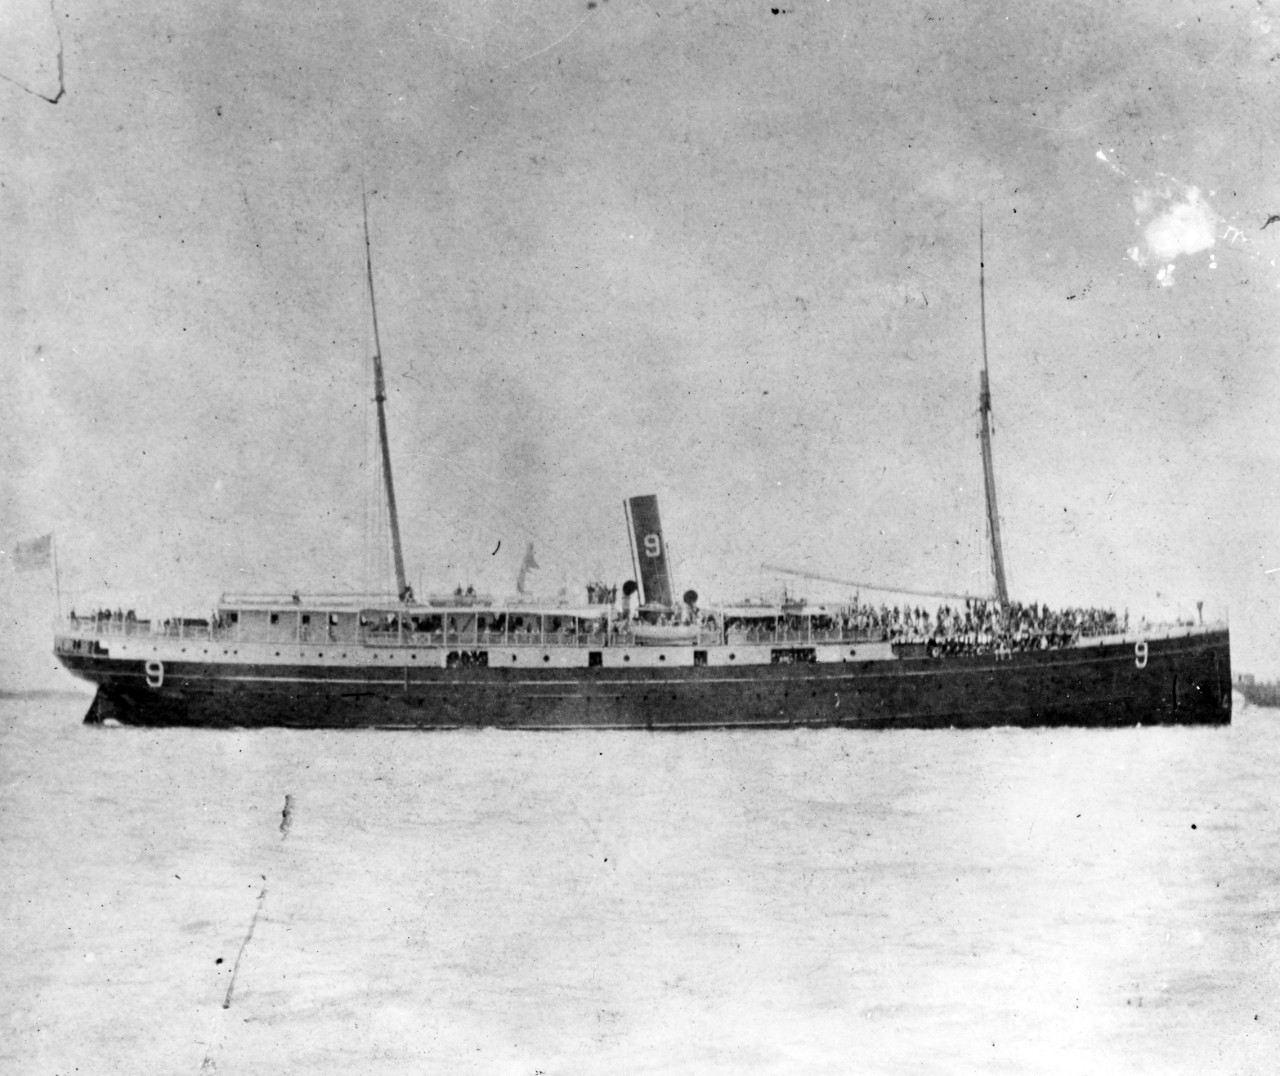 Army transport steamer (wearing ID# 9 on stack and hull)